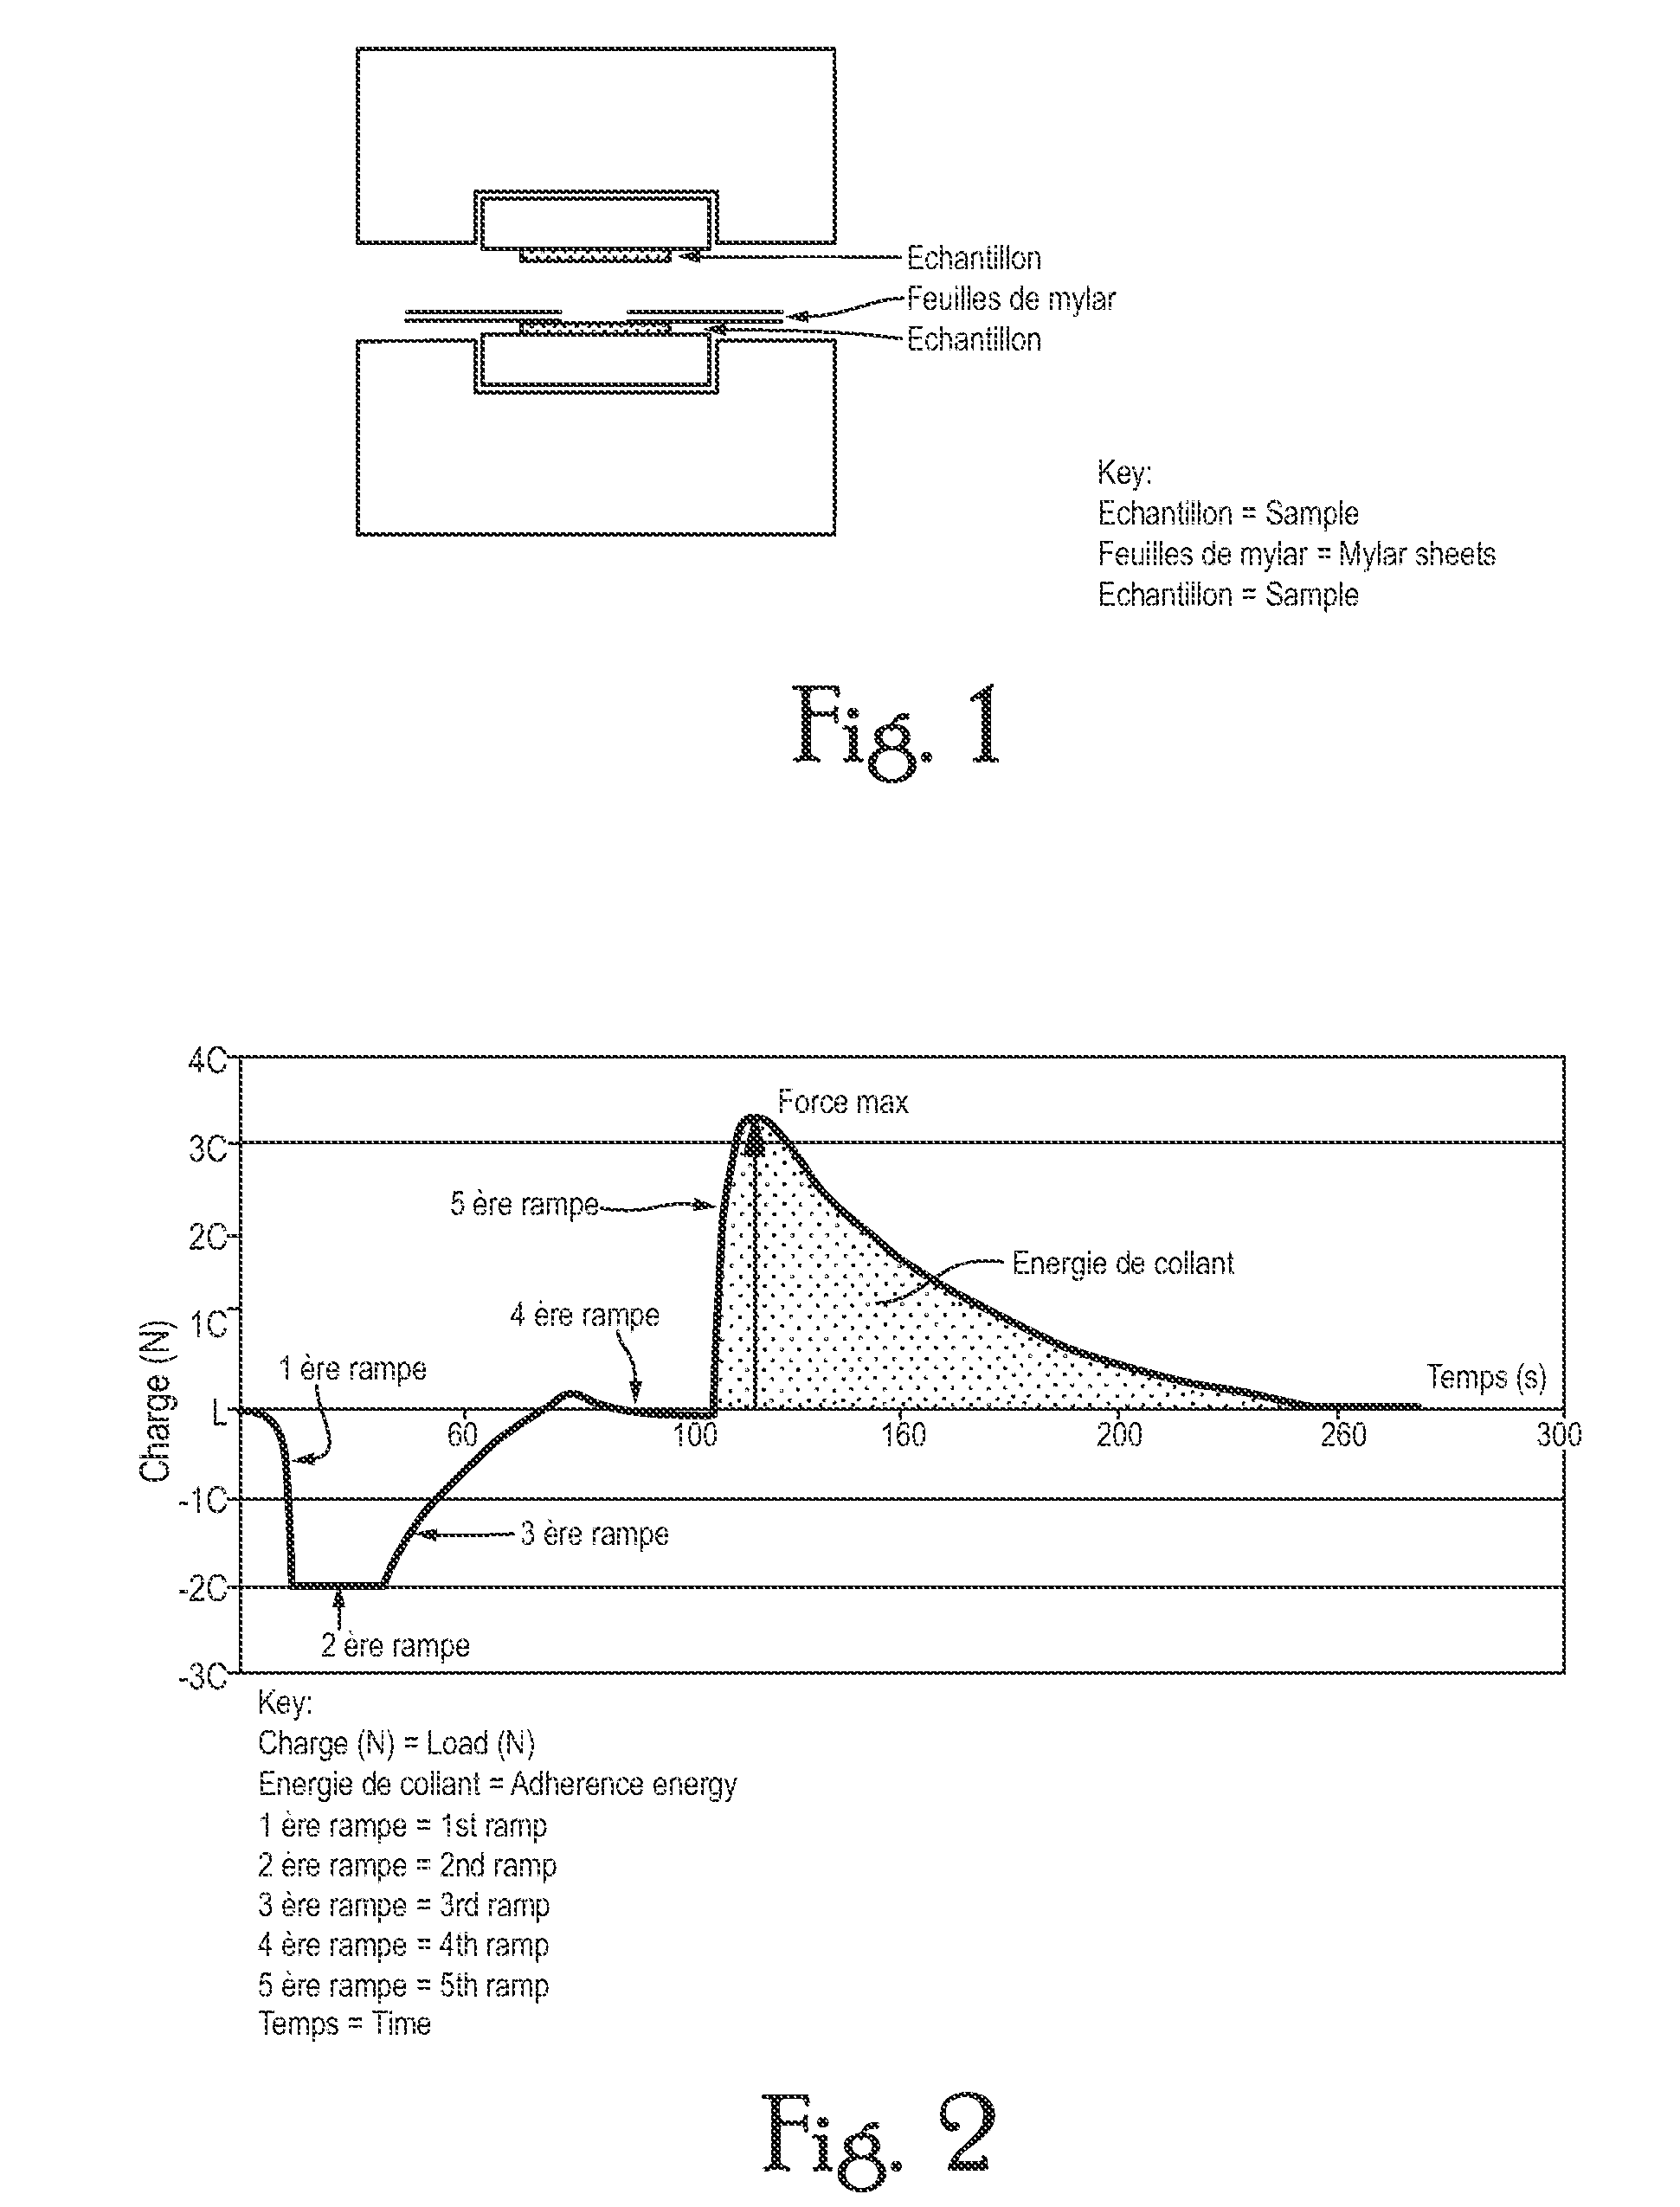 Novolac alkylphenol resins, method of production thereof and use thereof as tackifying and/or reinforcing resins for rubbers